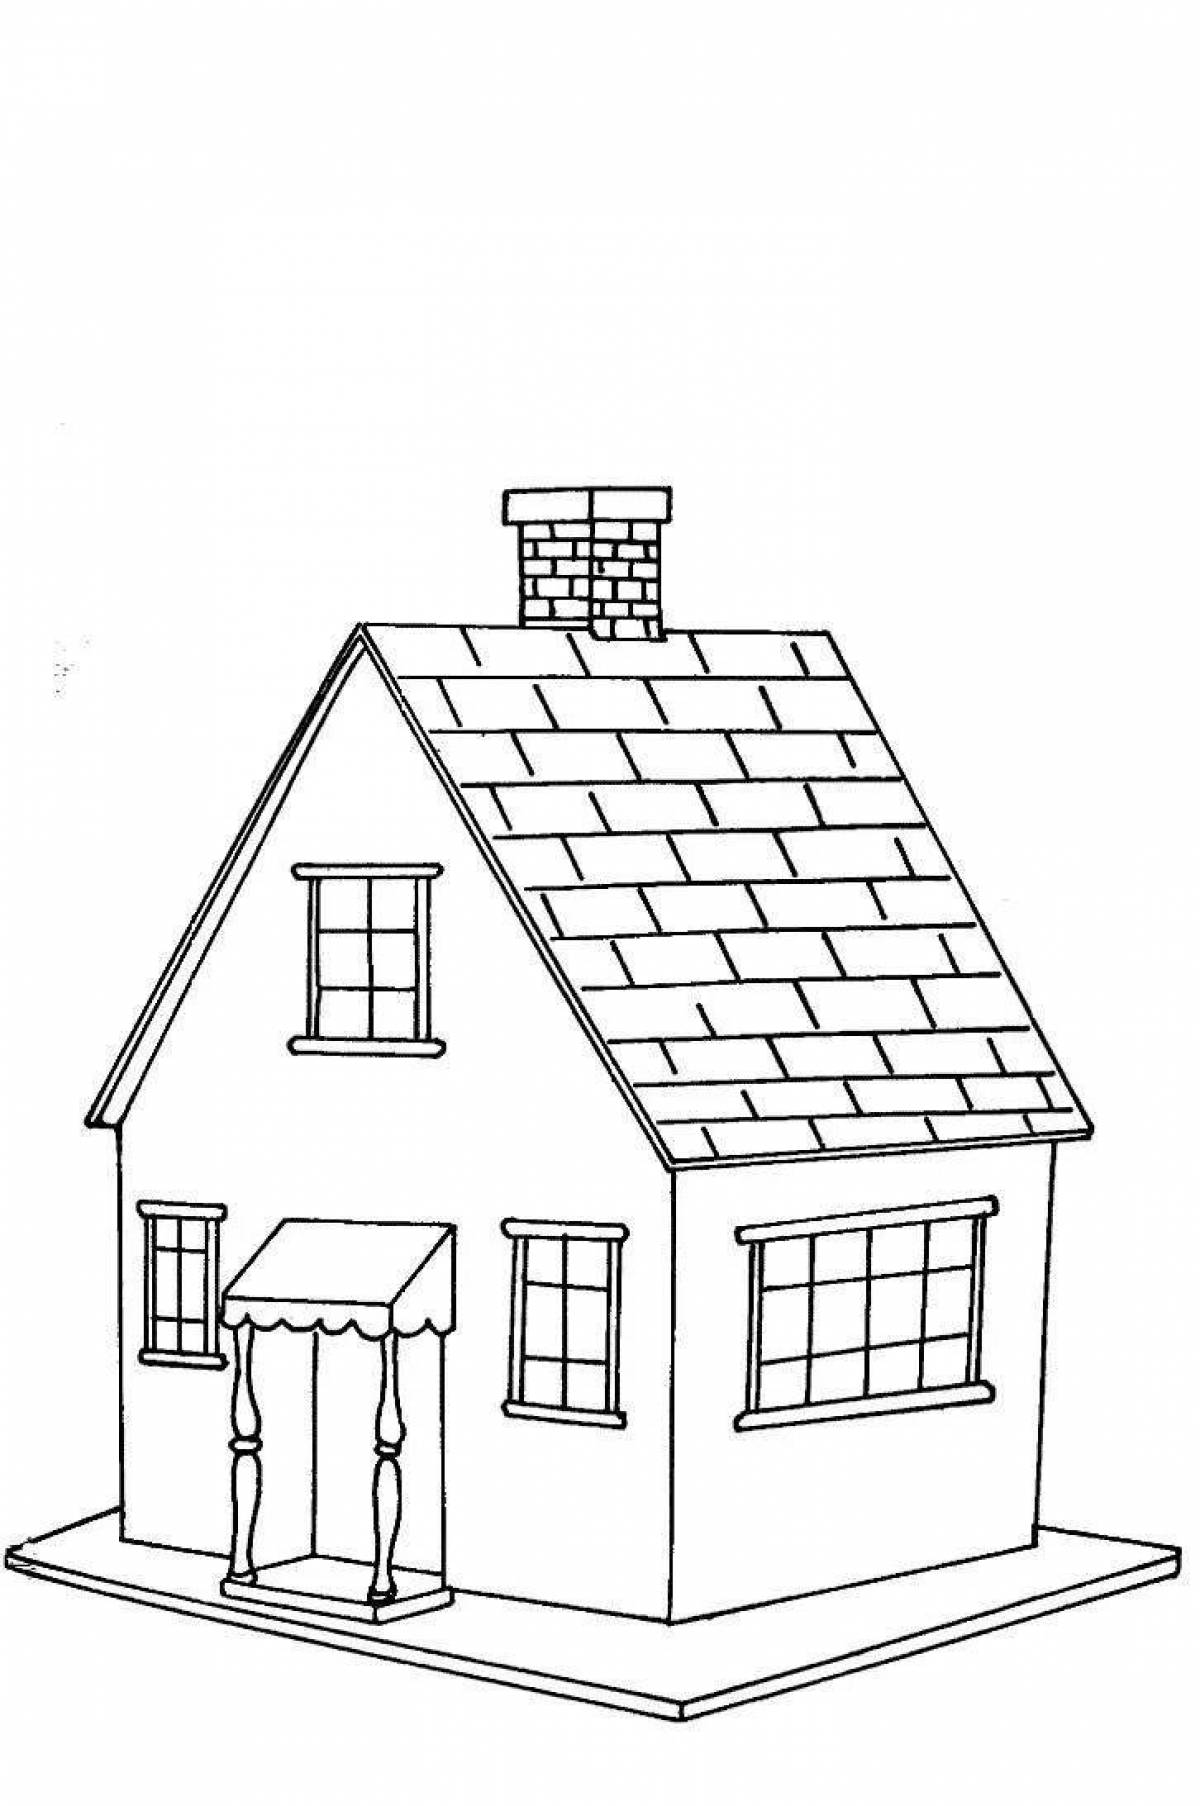 Coloring book glowing simple house